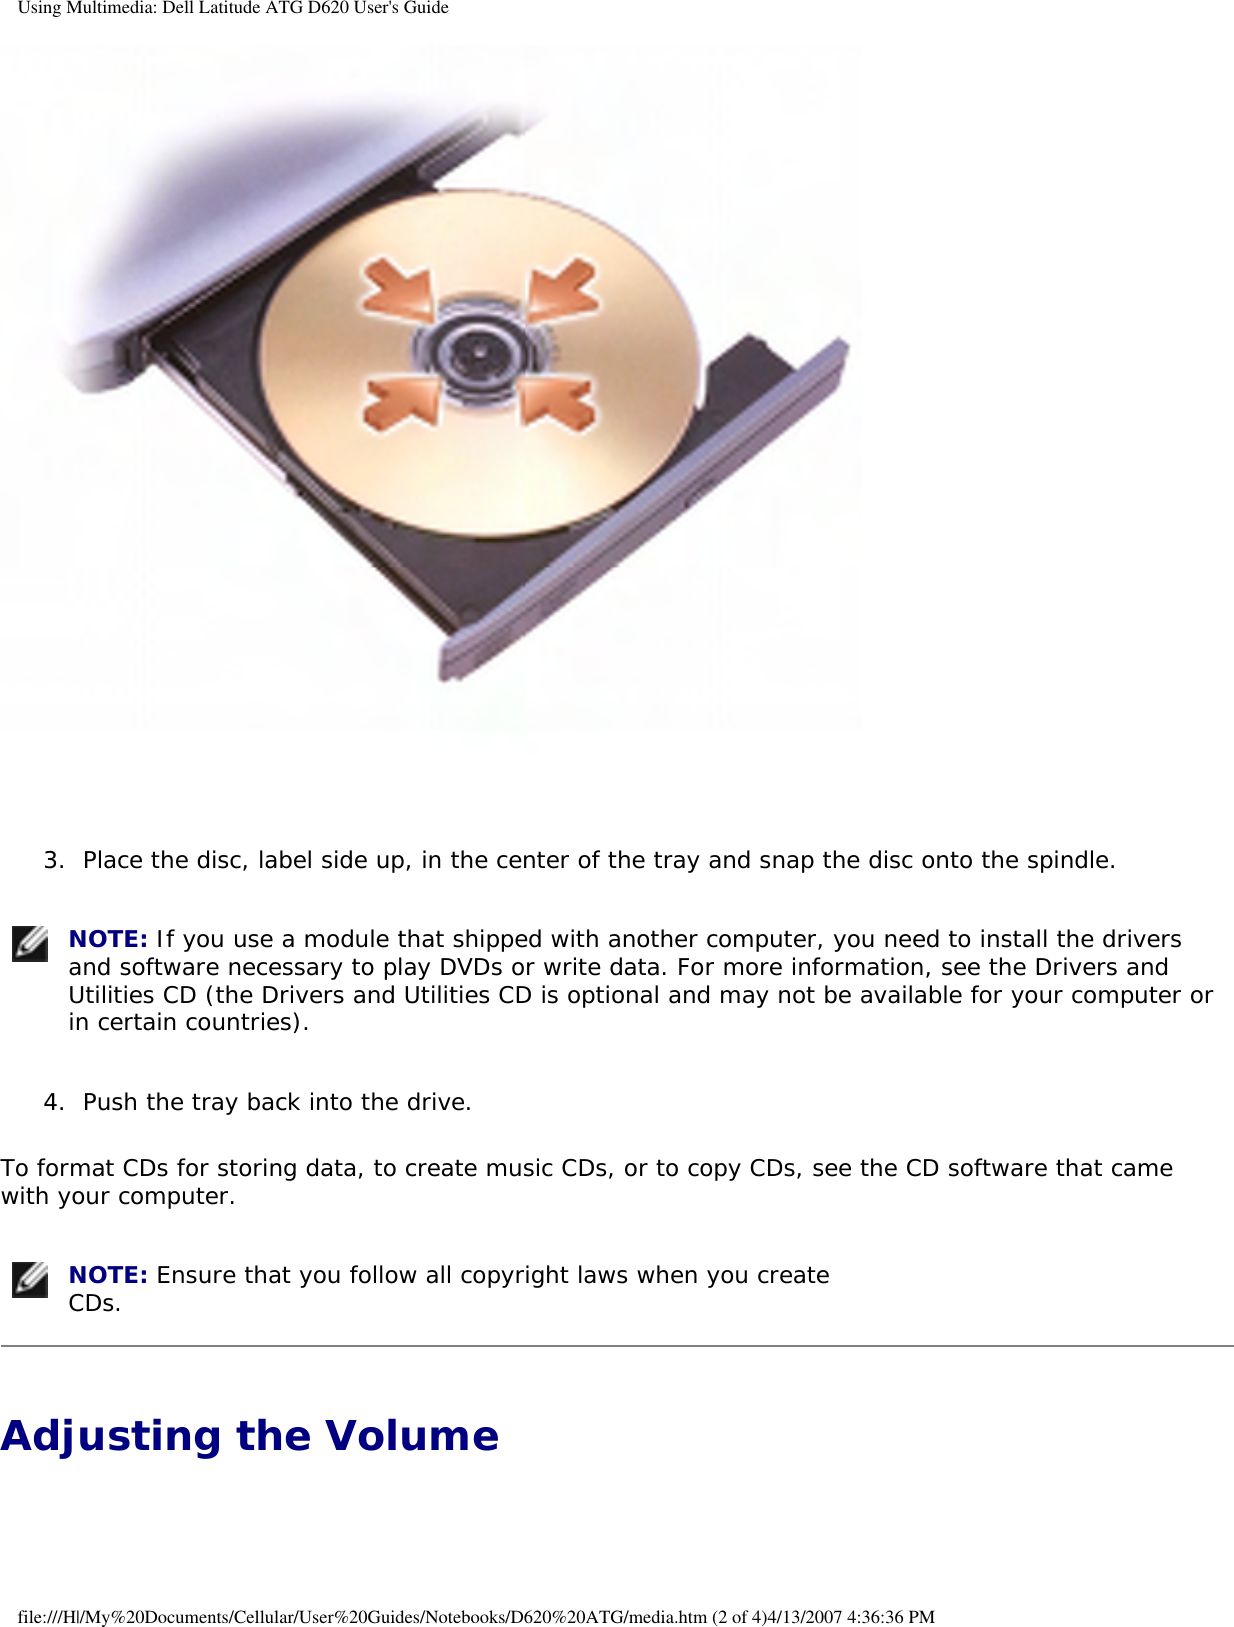 Using Multimedia: Dell Latitude ATG D620 User&apos;s Guide 3.  Place the disc, label side up, in the center of the tray and snap the disc onto the spindle.    NOTE: If you use a module that shipped with another computer, you need to install the drivers and software necessary to play DVDs or write data. For more information, see the Drivers and Utilities CD (the Drivers and Utilities CD is optional and may not be available for your computer or in certain countries). 4.  Push the tray back into the drive.   To format CDs for storing data, to create music CDs, or to copy CDs, see the CD software that came with your computer. NOTE: Ensure that you follow all copyright laws when you create CDs. Adjusting the Volume file:///H|/My%20Documents/Cellular/User%20Guides/Notebooks/D620%20ATG/media.htm (2 of 4)4/13/2007 4:36:36 PM